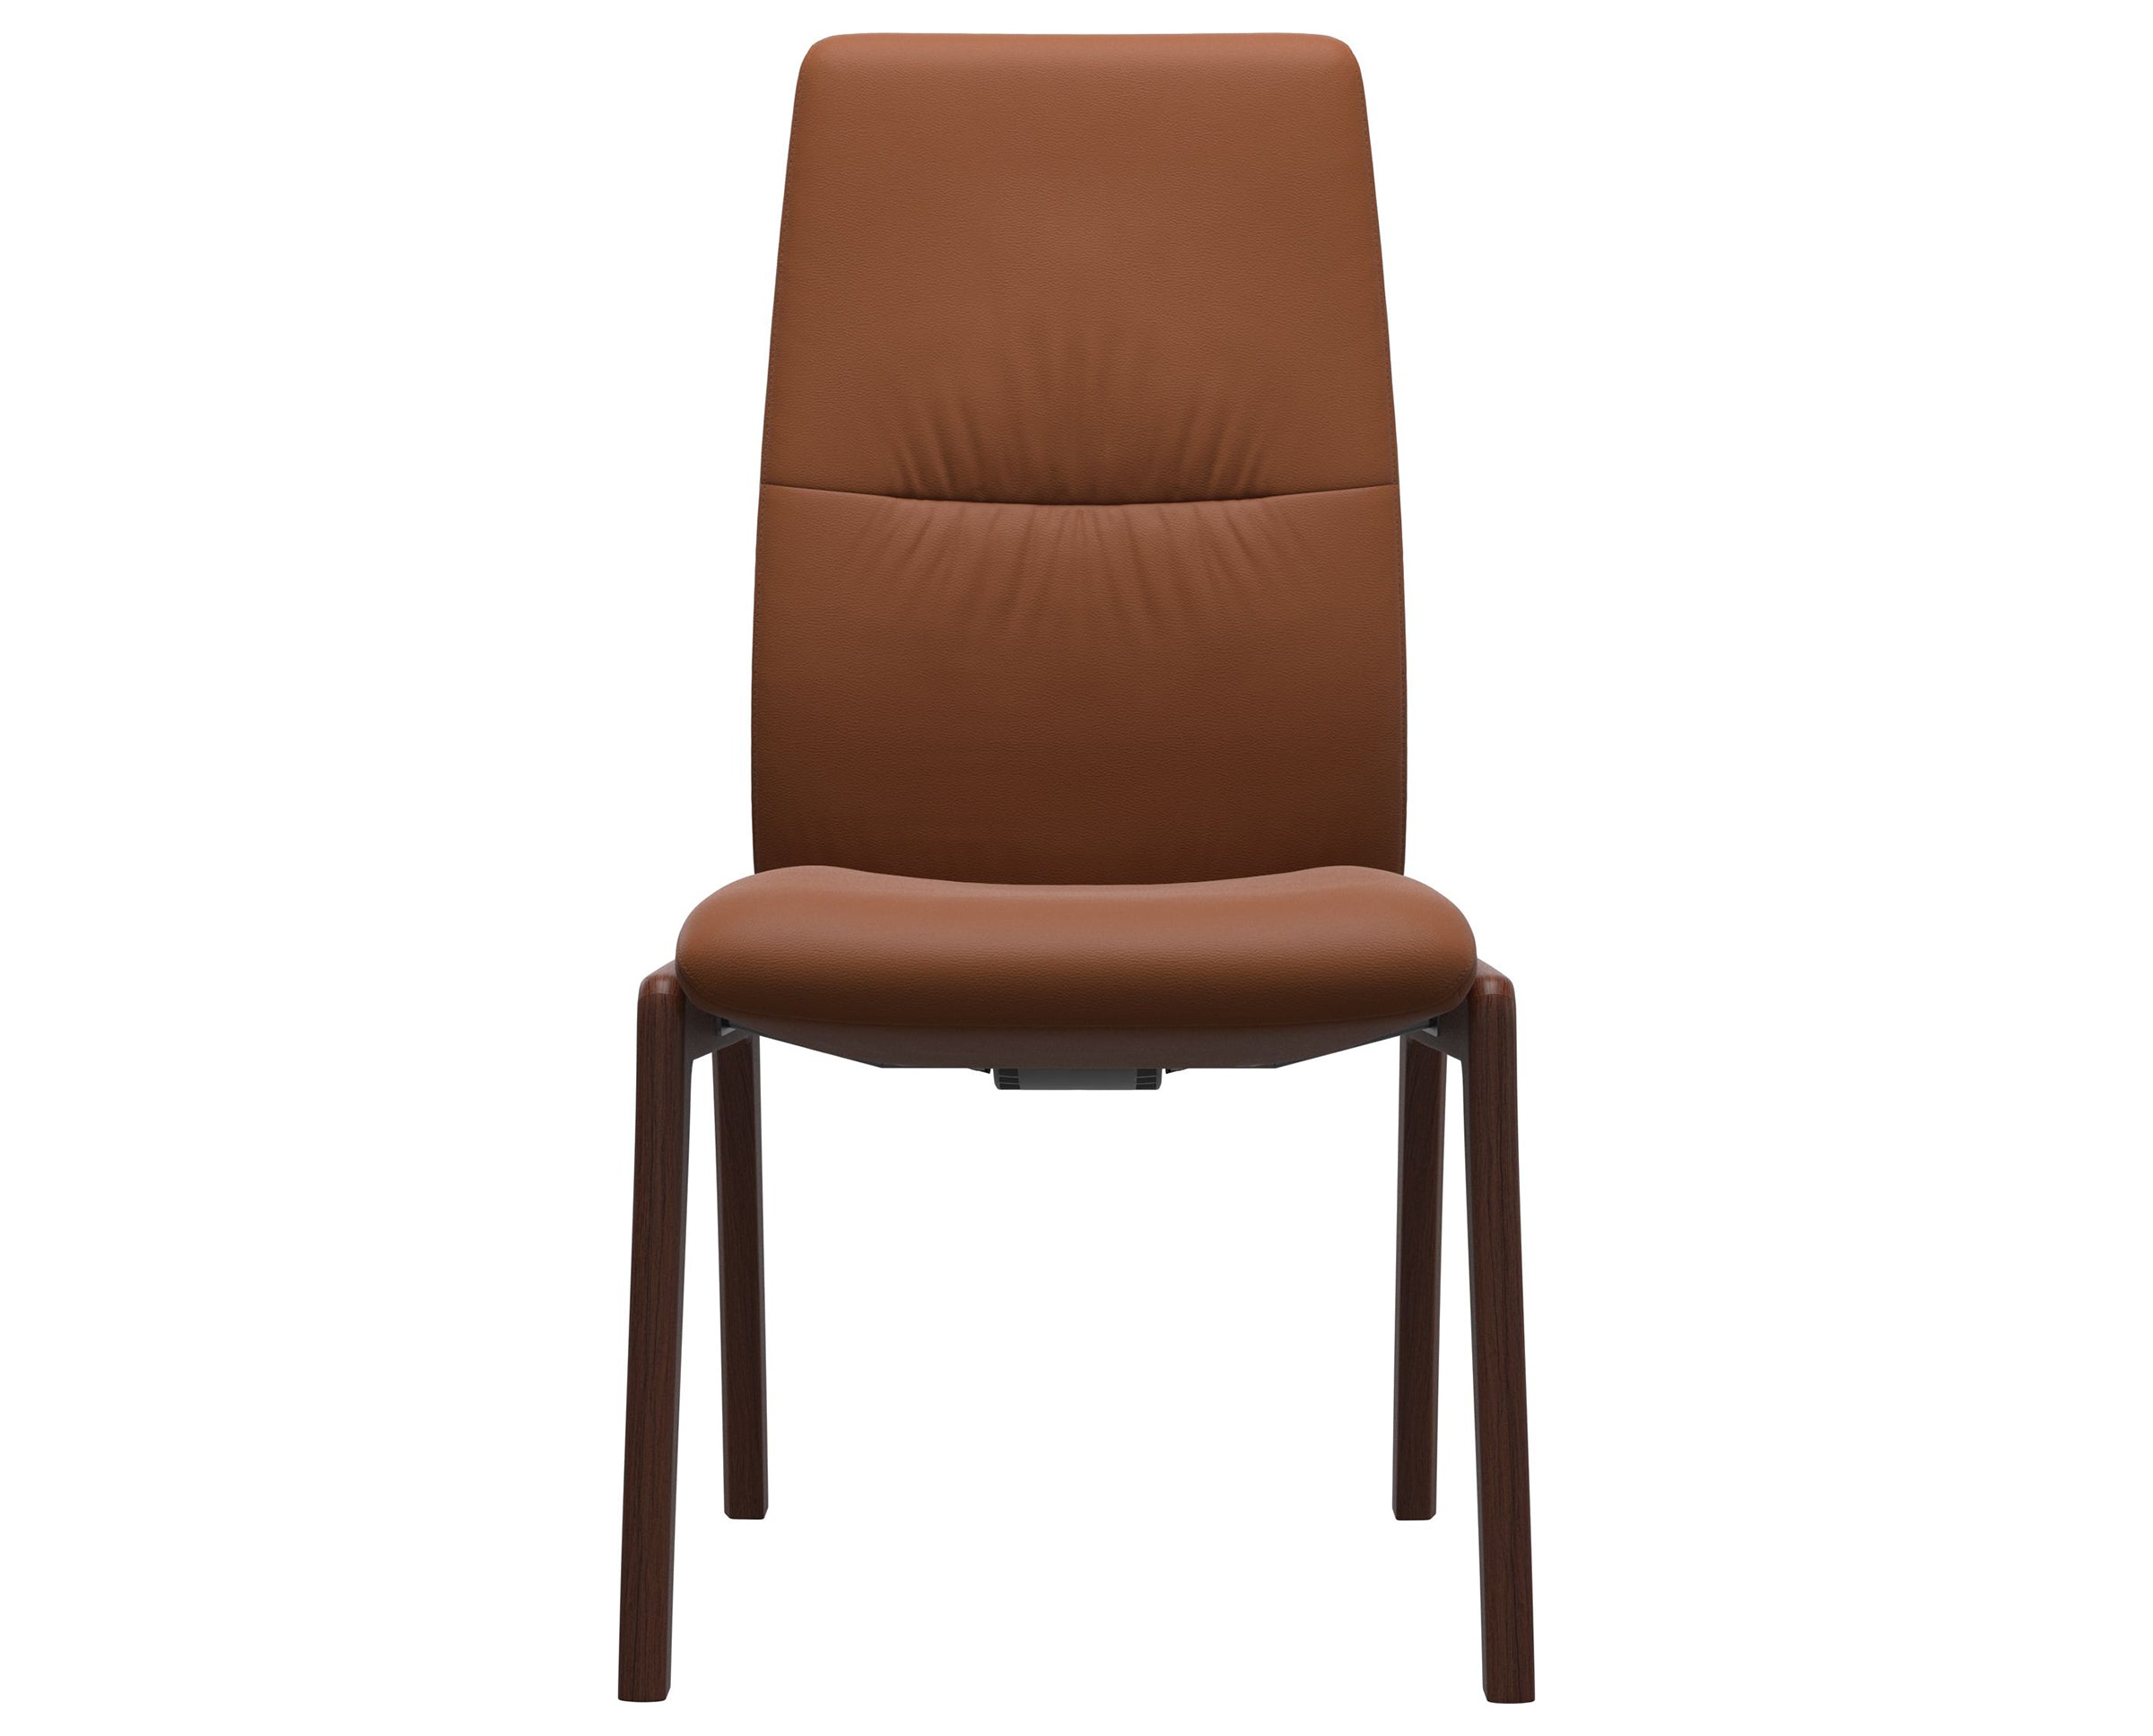 Paloma Leather New Cognac and Walnut Base | Stressless Mint High Back D100 Dining Chair | Valley Ridge Furniture